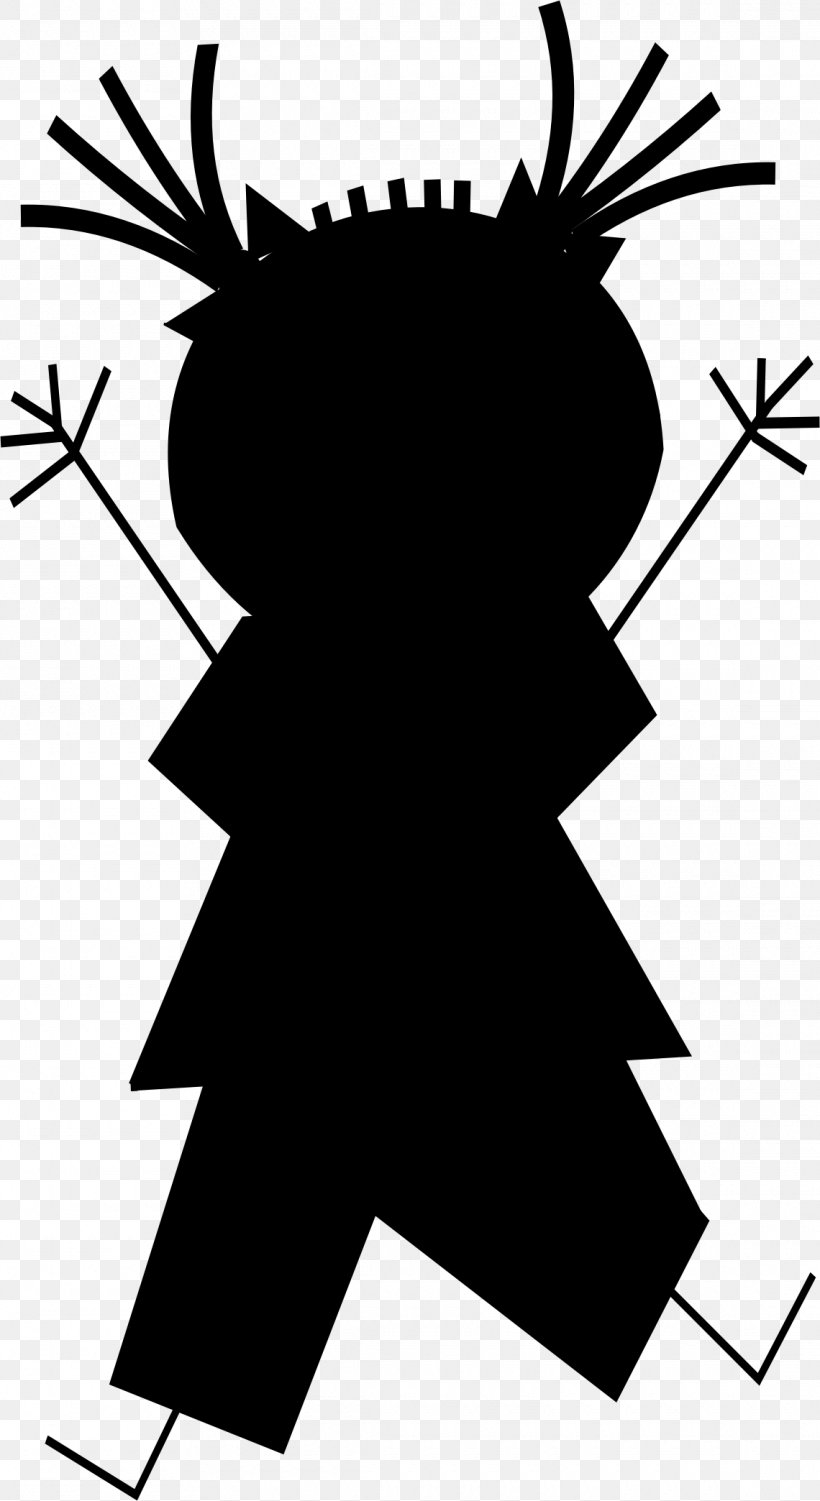 Clip Art Silhouette Drawing Cartoon Humour, PNG, 1140x2088px, Silhouette, Black, Blackandwhite, Caricature, Cartoon Download Free